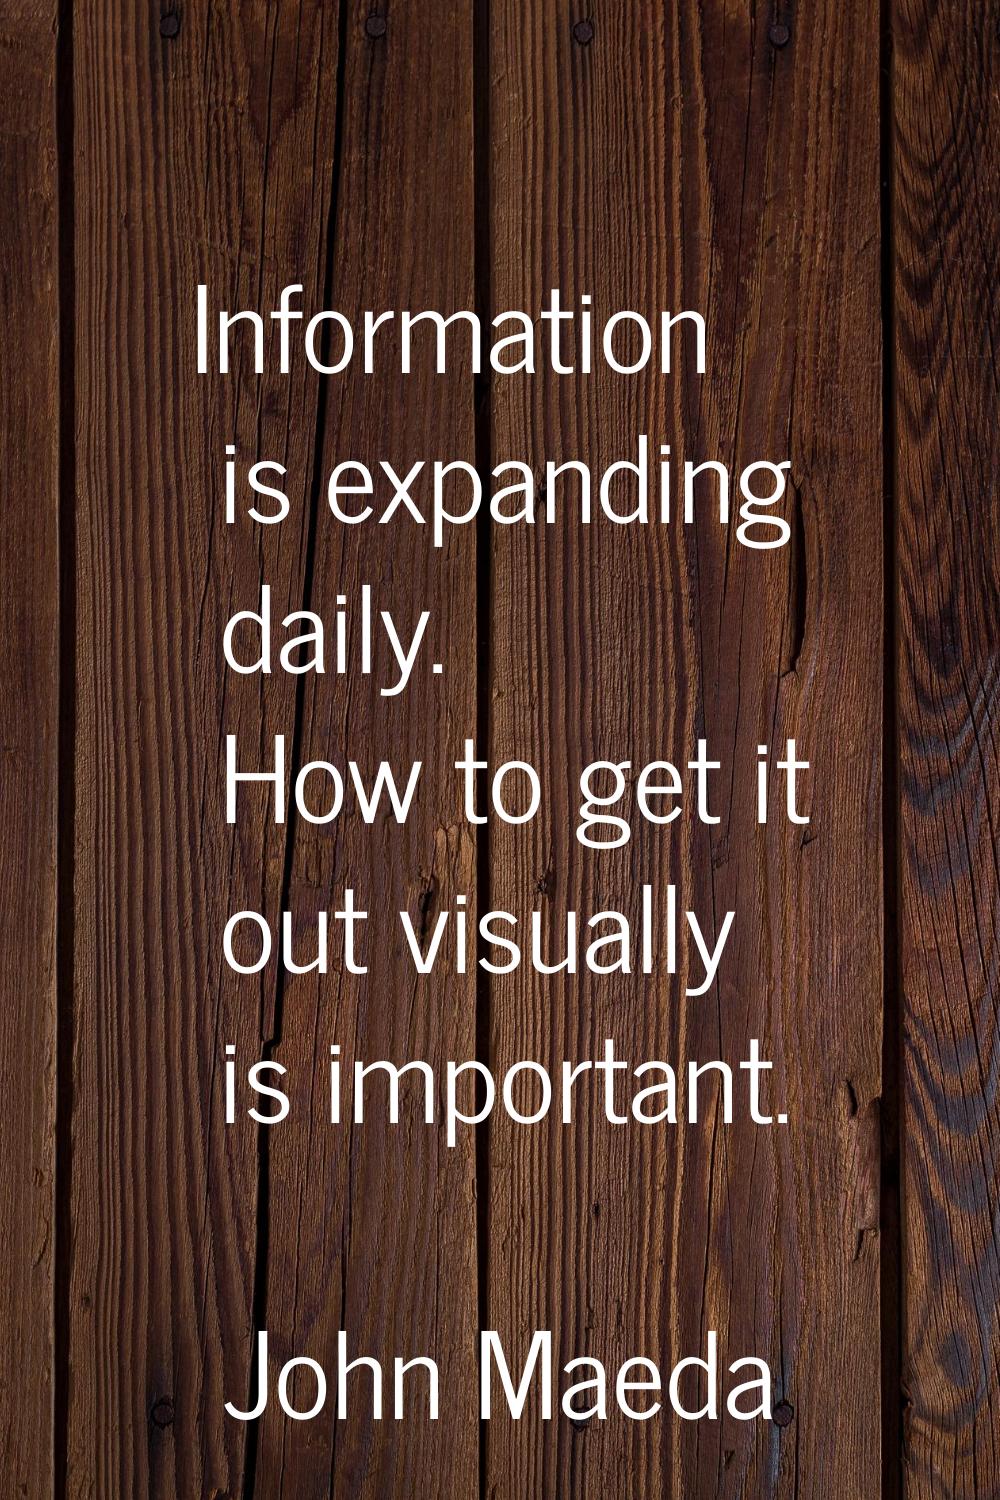 Information is expanding daily. How to get it out visually is important.